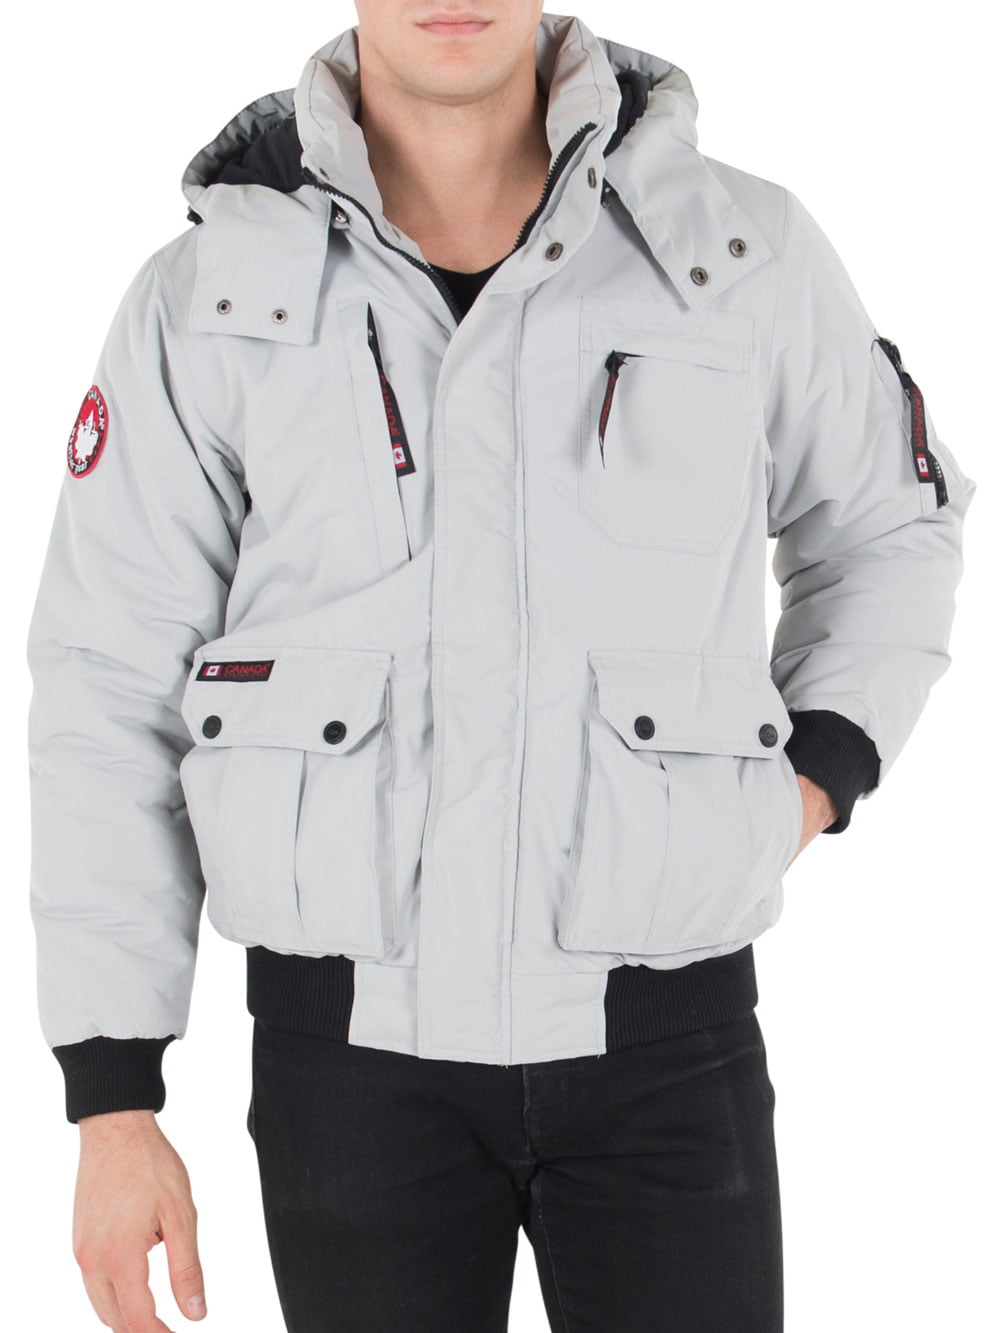 Canada Weather Gear Men's Insulated Jacket 